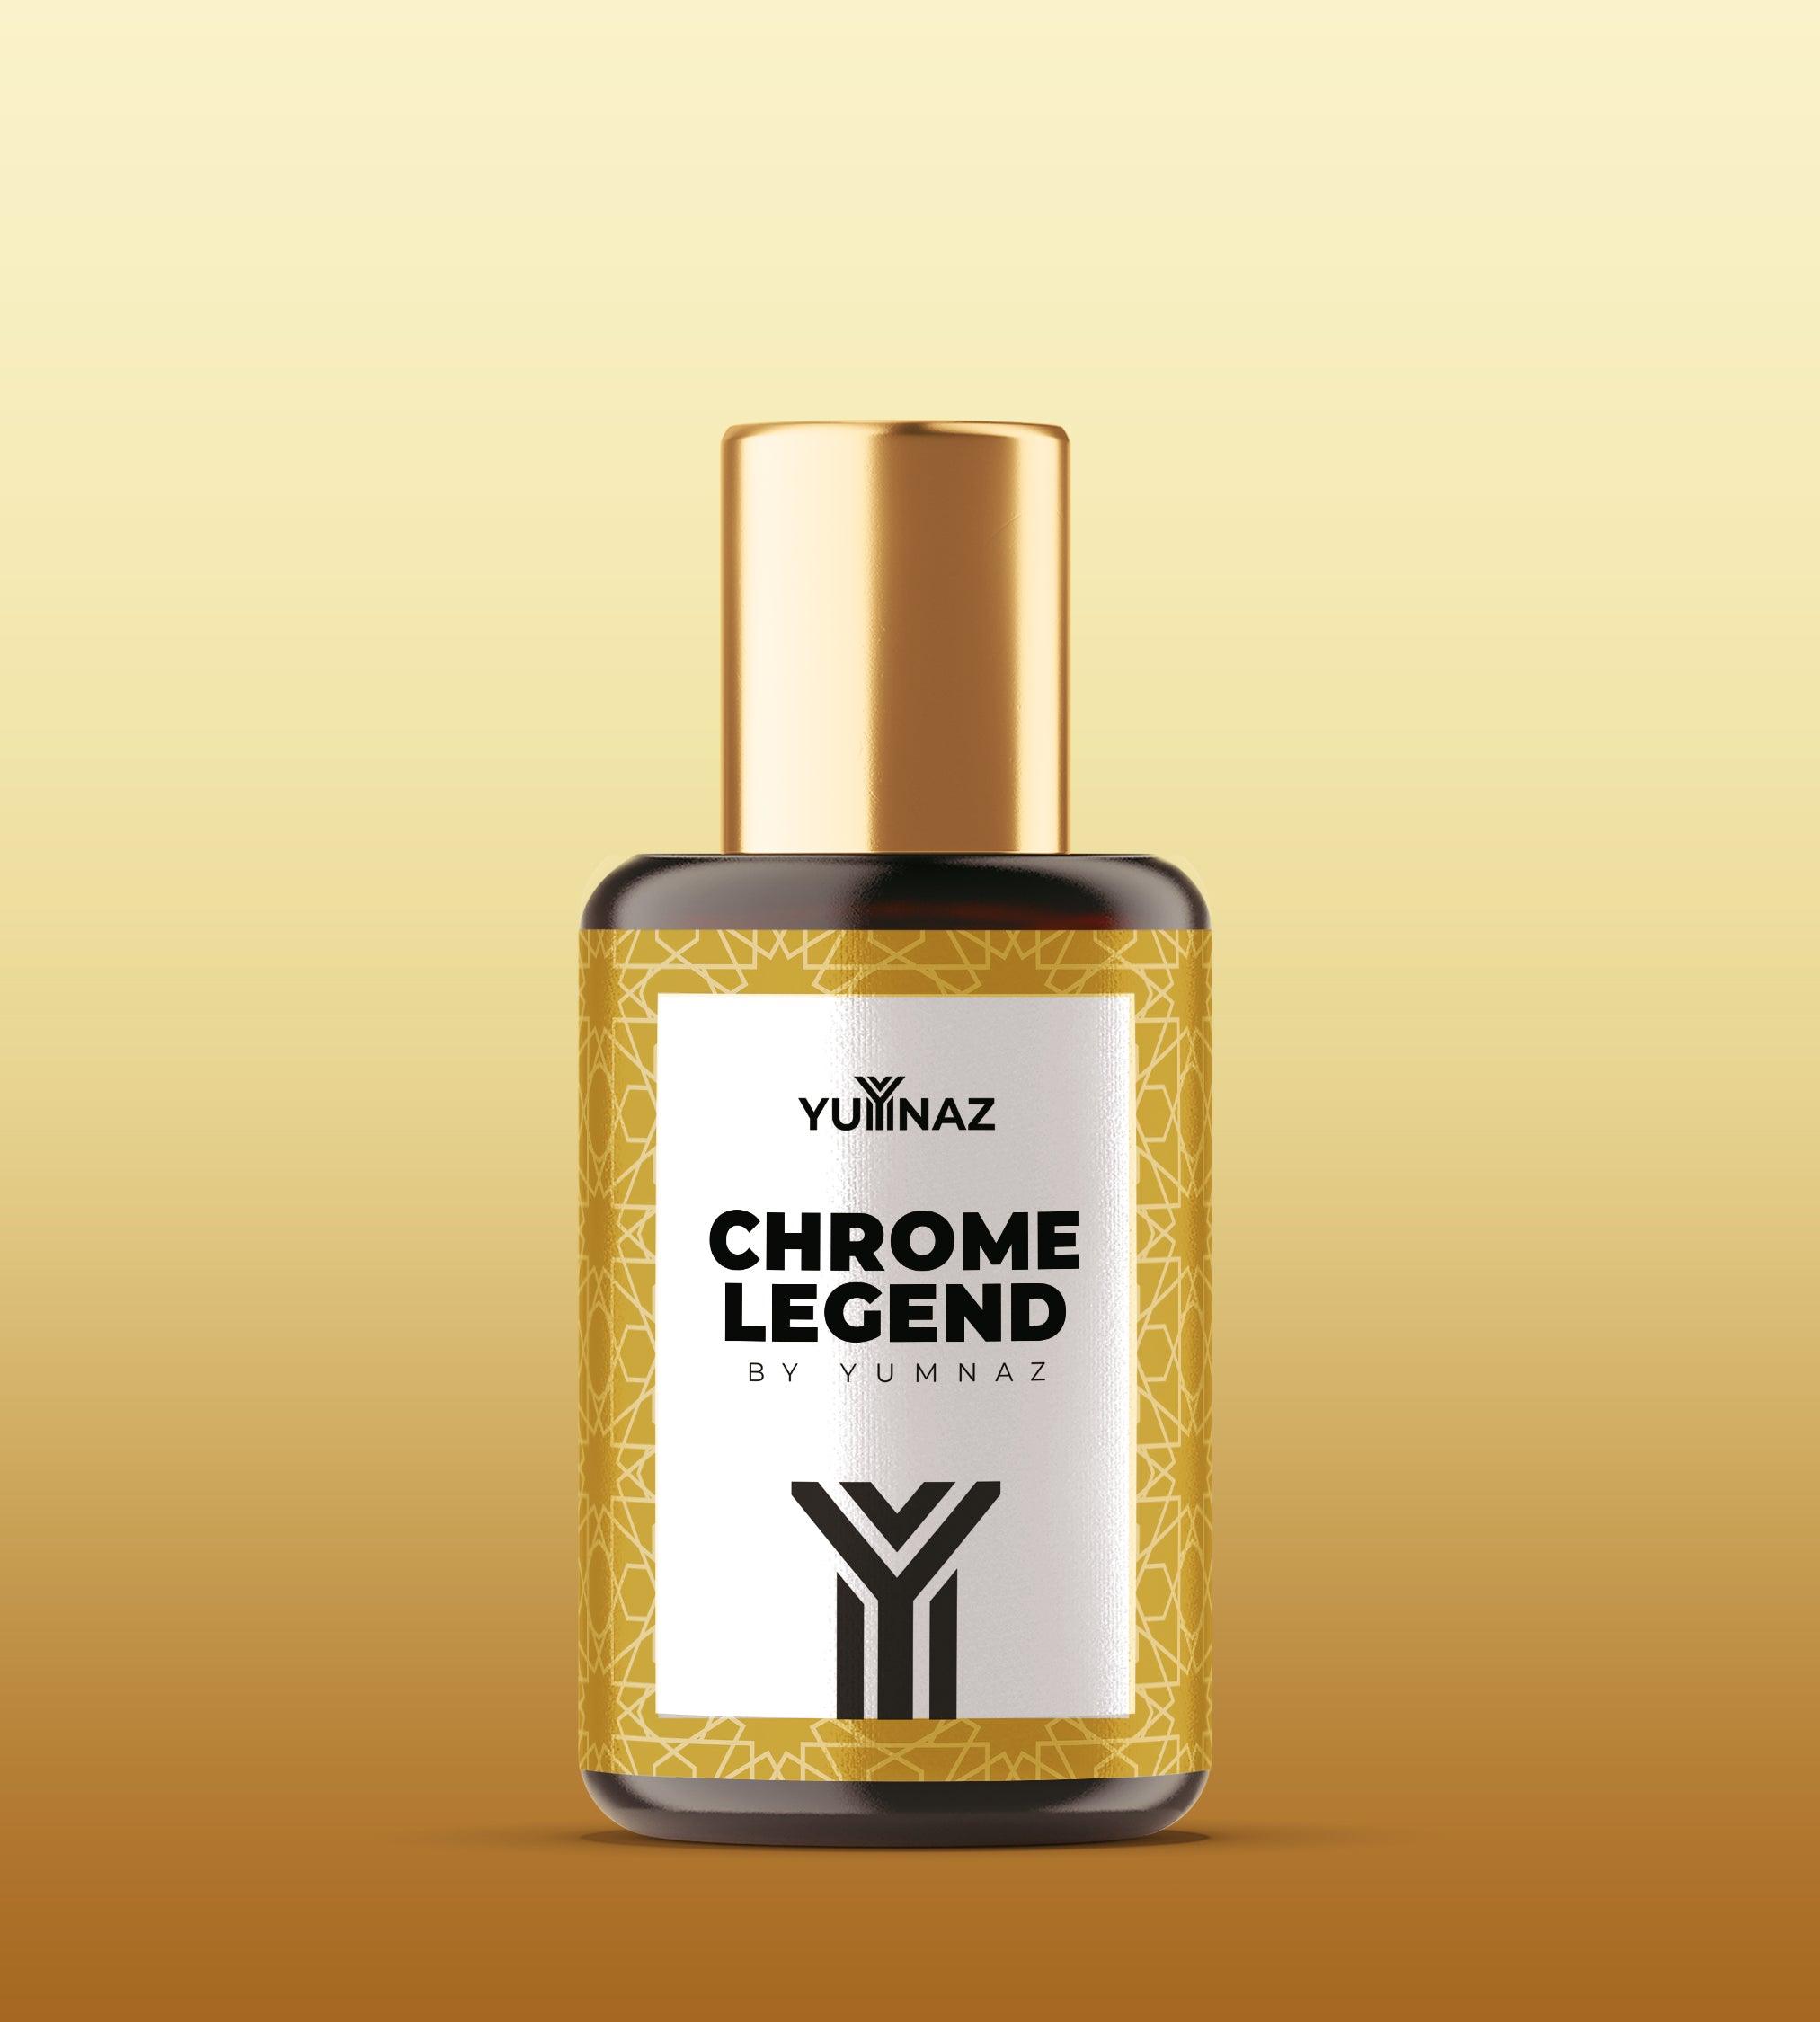 Get the Chrome Legend Perfume on a reasonable Price in Pakistan - yumnaz